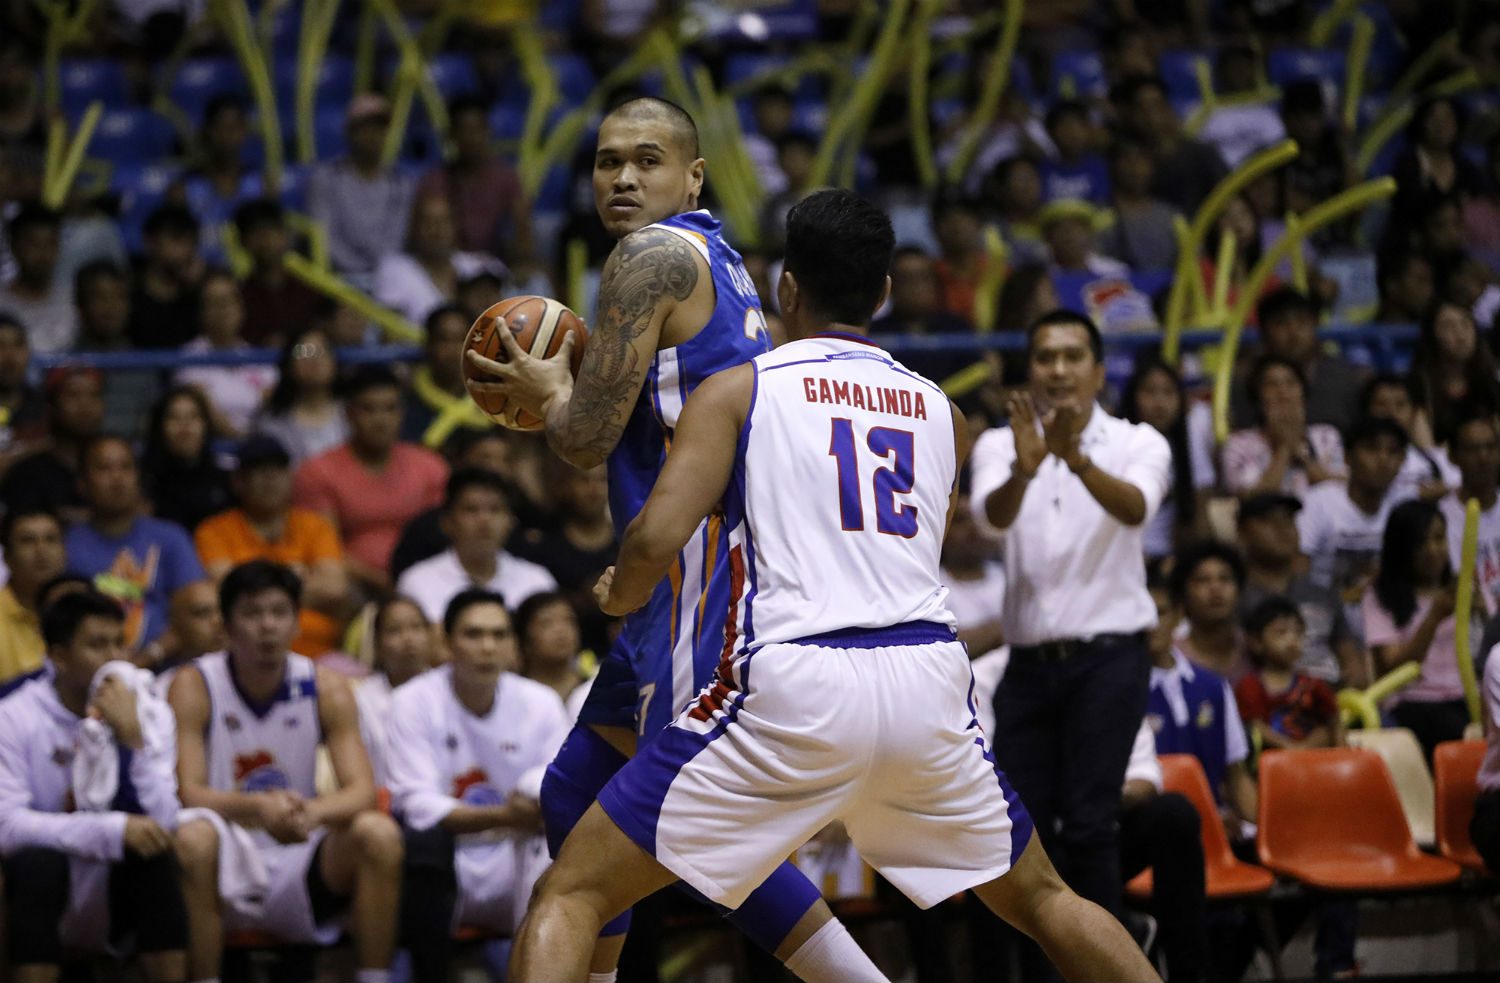 Alas-less NLEX loses another soldier as Quiñahan gets ejected in Game 6